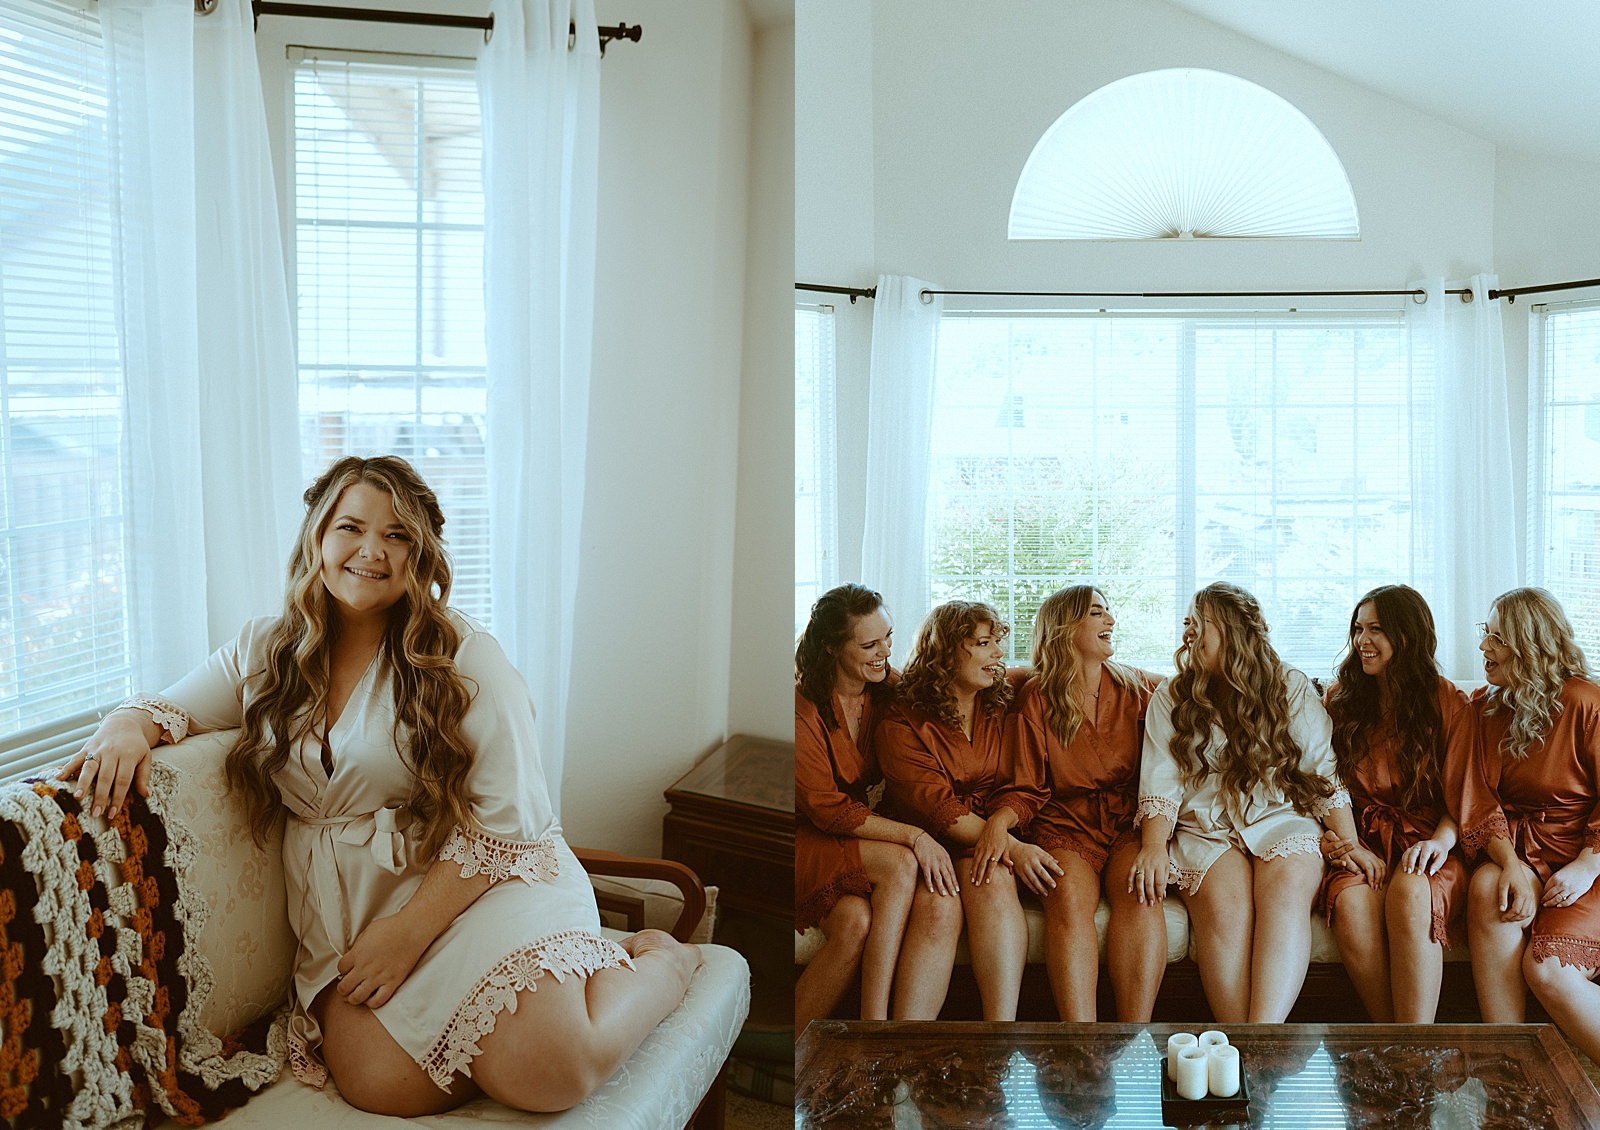 Bride and bridesmaids getting ready photos by Danielle Johnson Photography